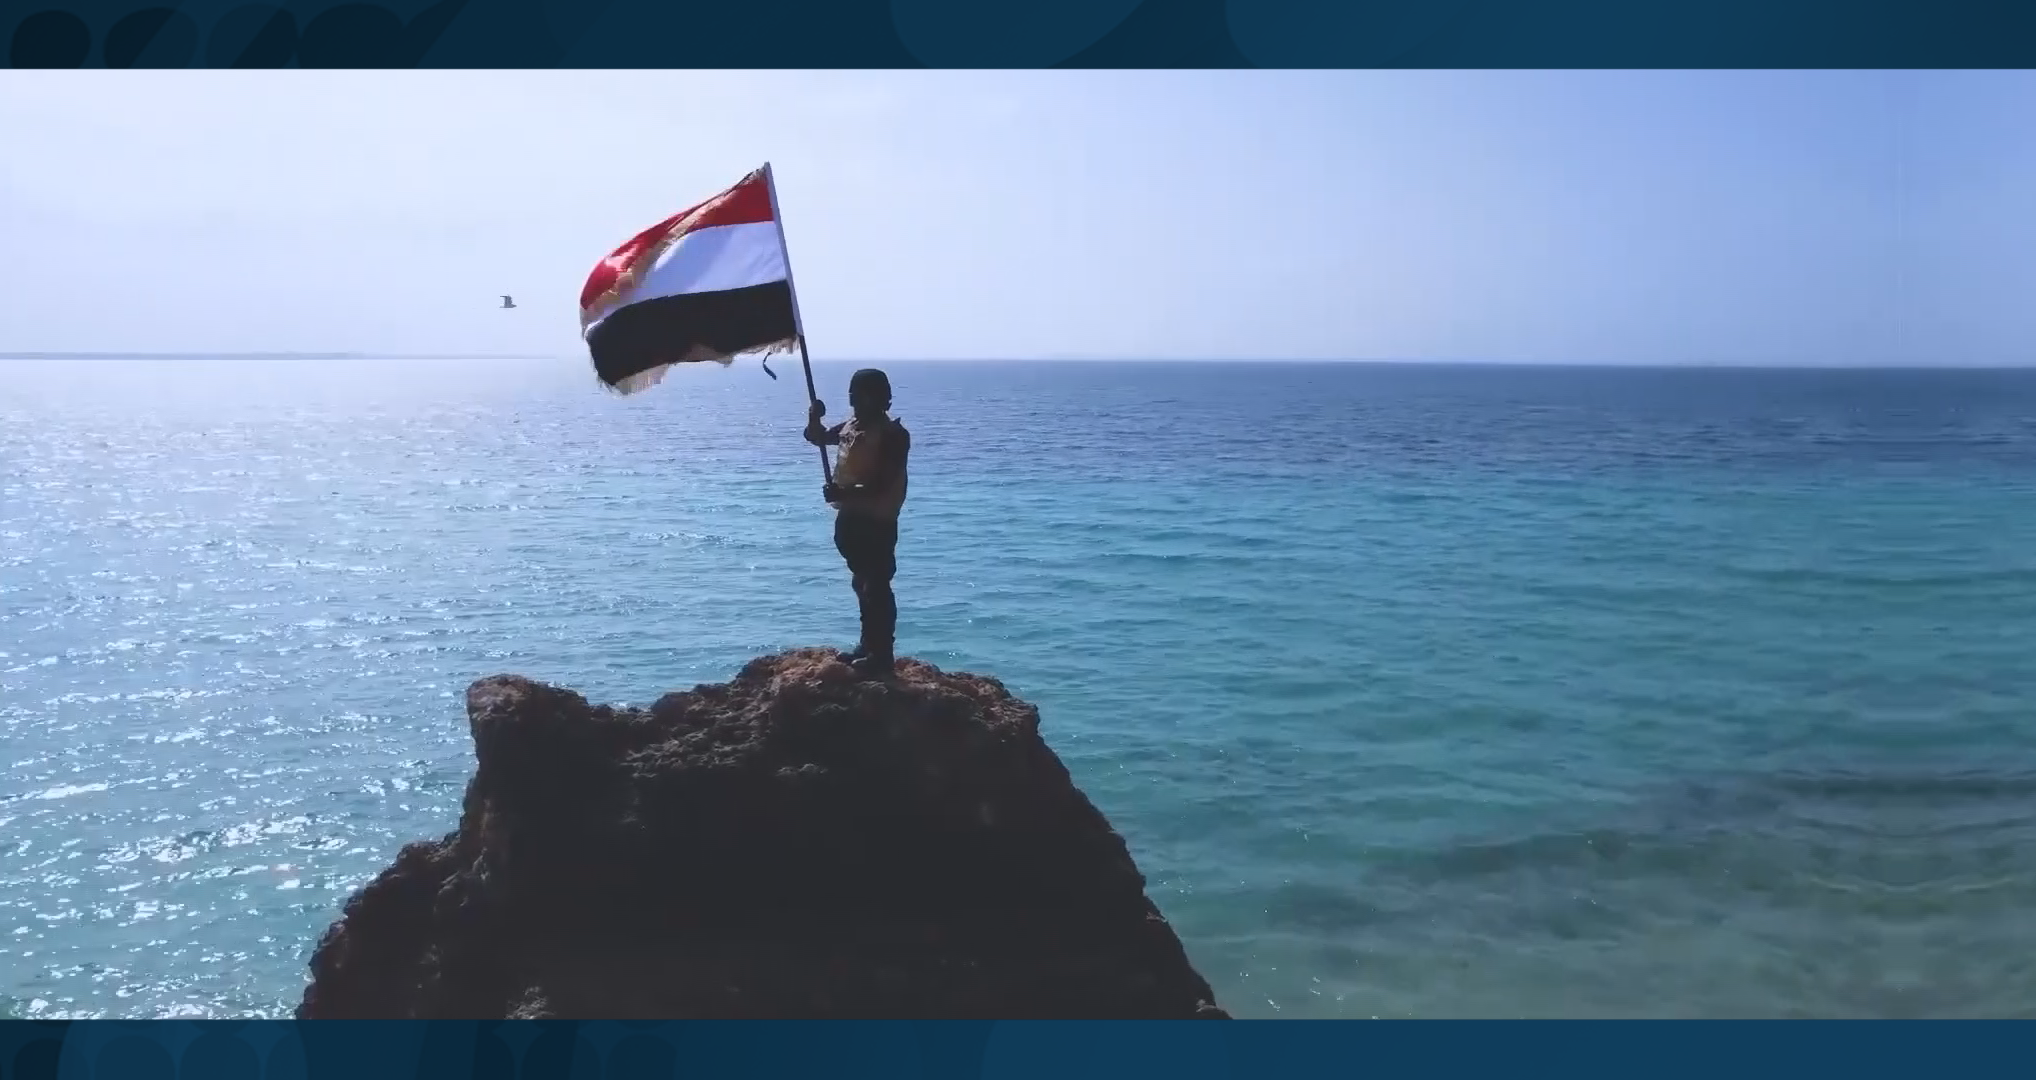 Yemeni forces launch new operations against multiple vessels